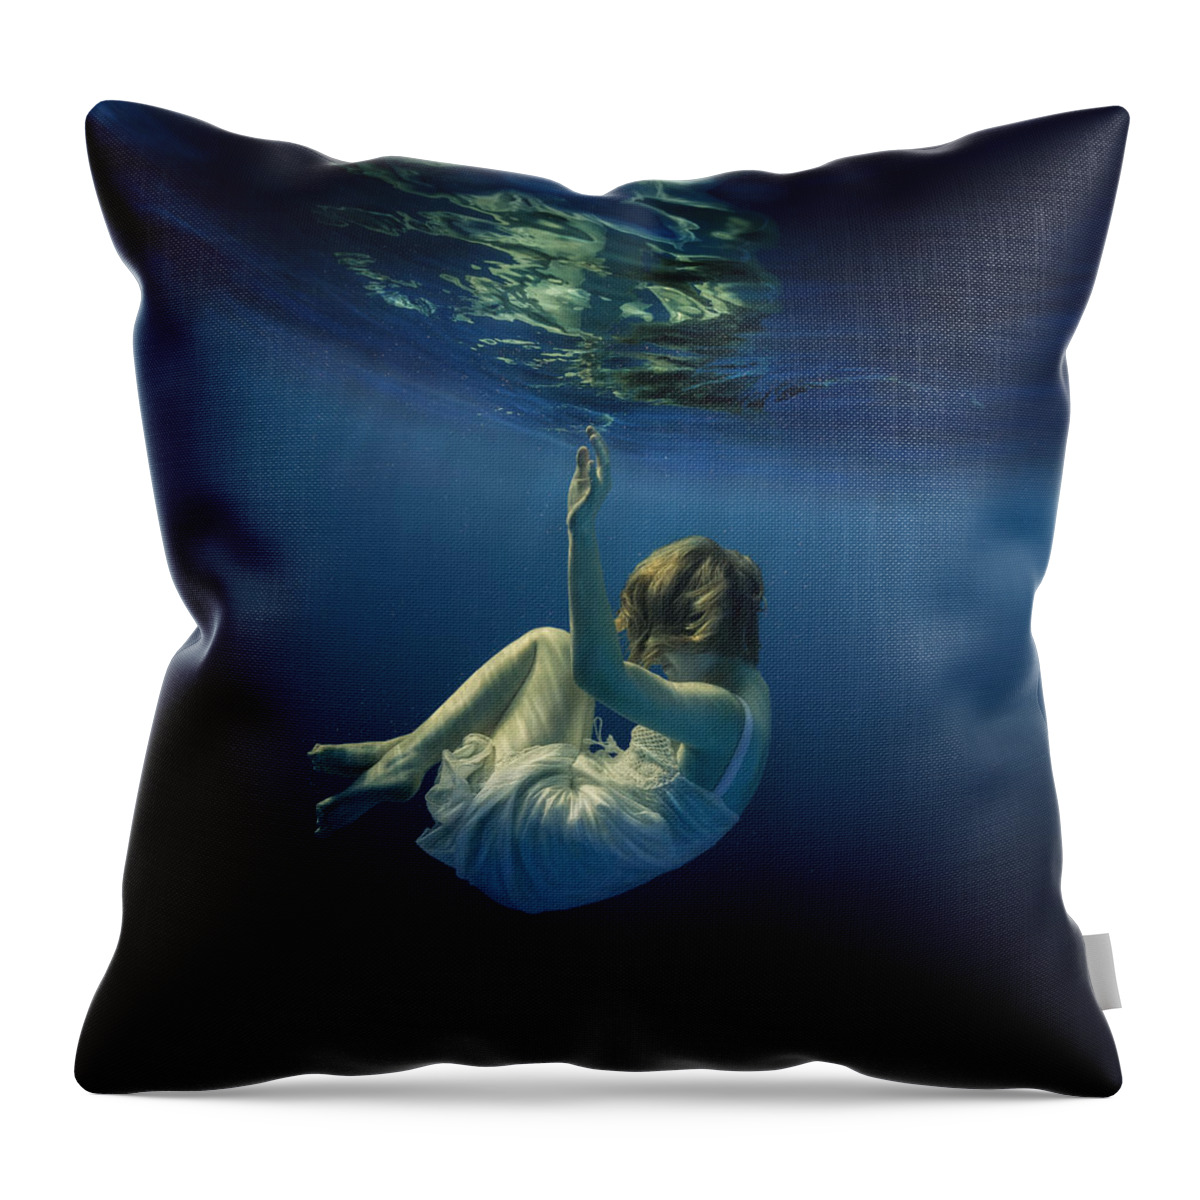 Unusual Throw Pillow featuring the photograph Habitat by Dmitry Laudin